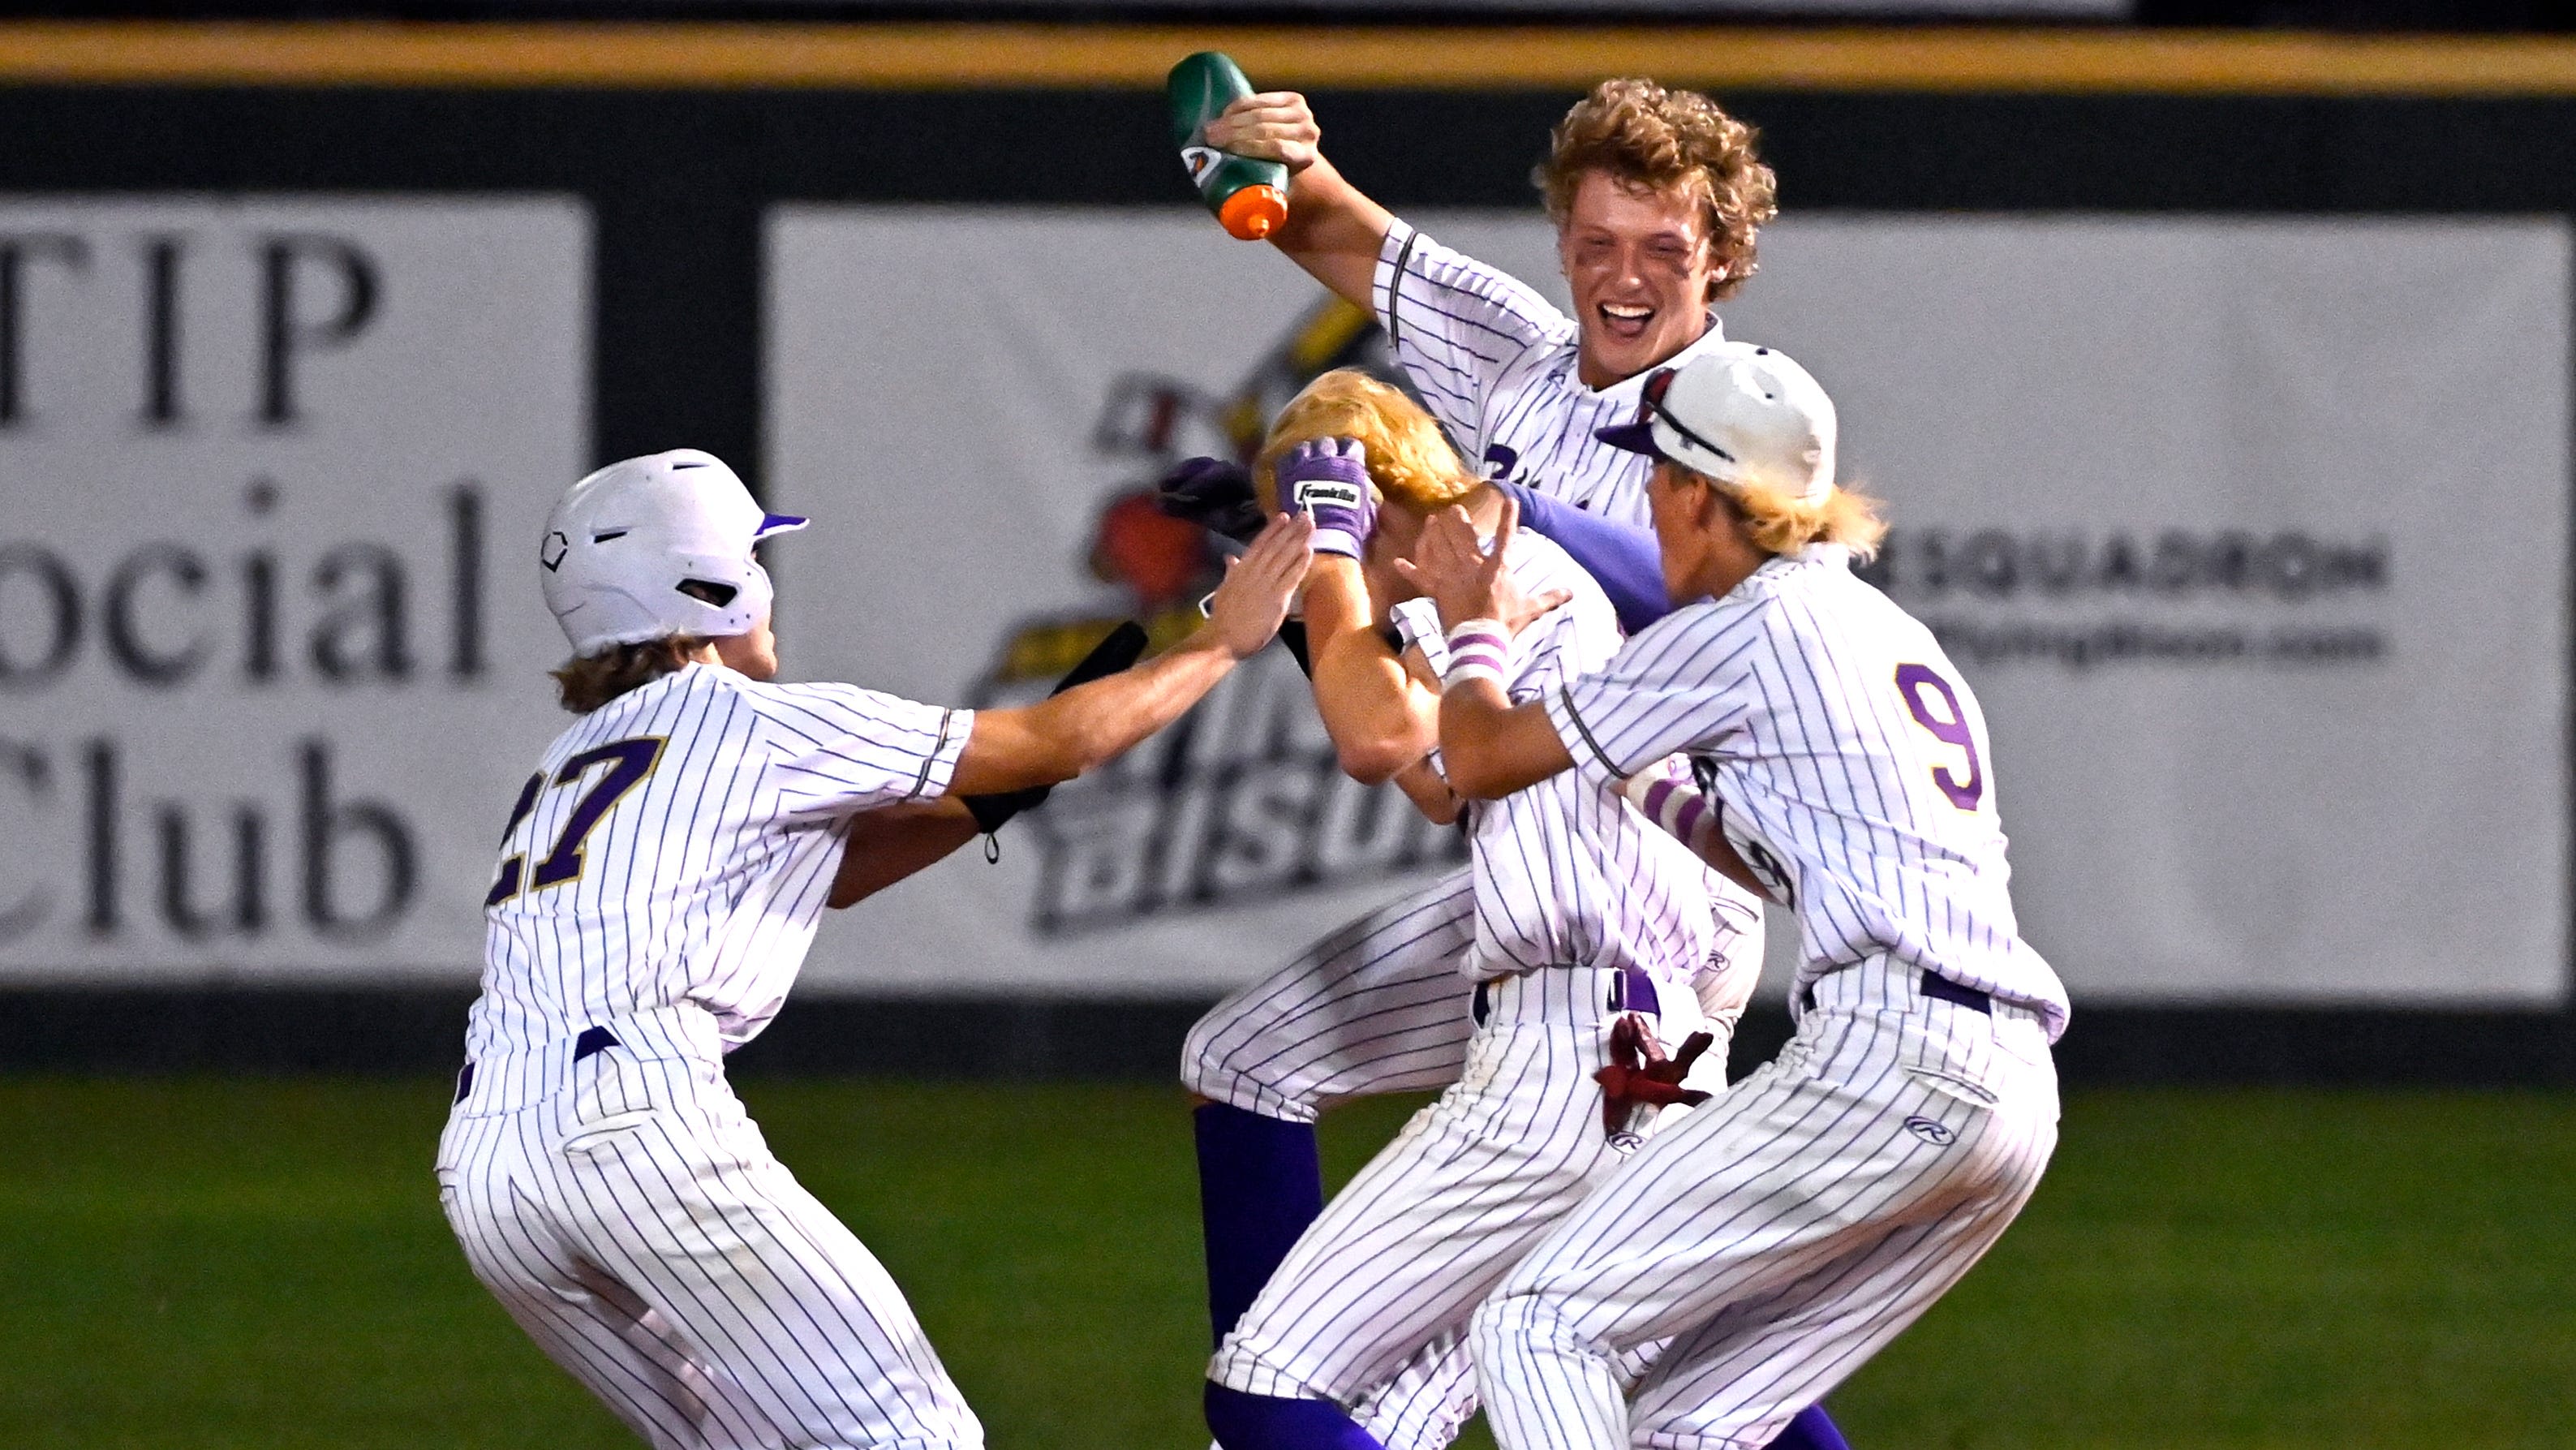 Top moments from Game of Abilene High vs Wylie baseball